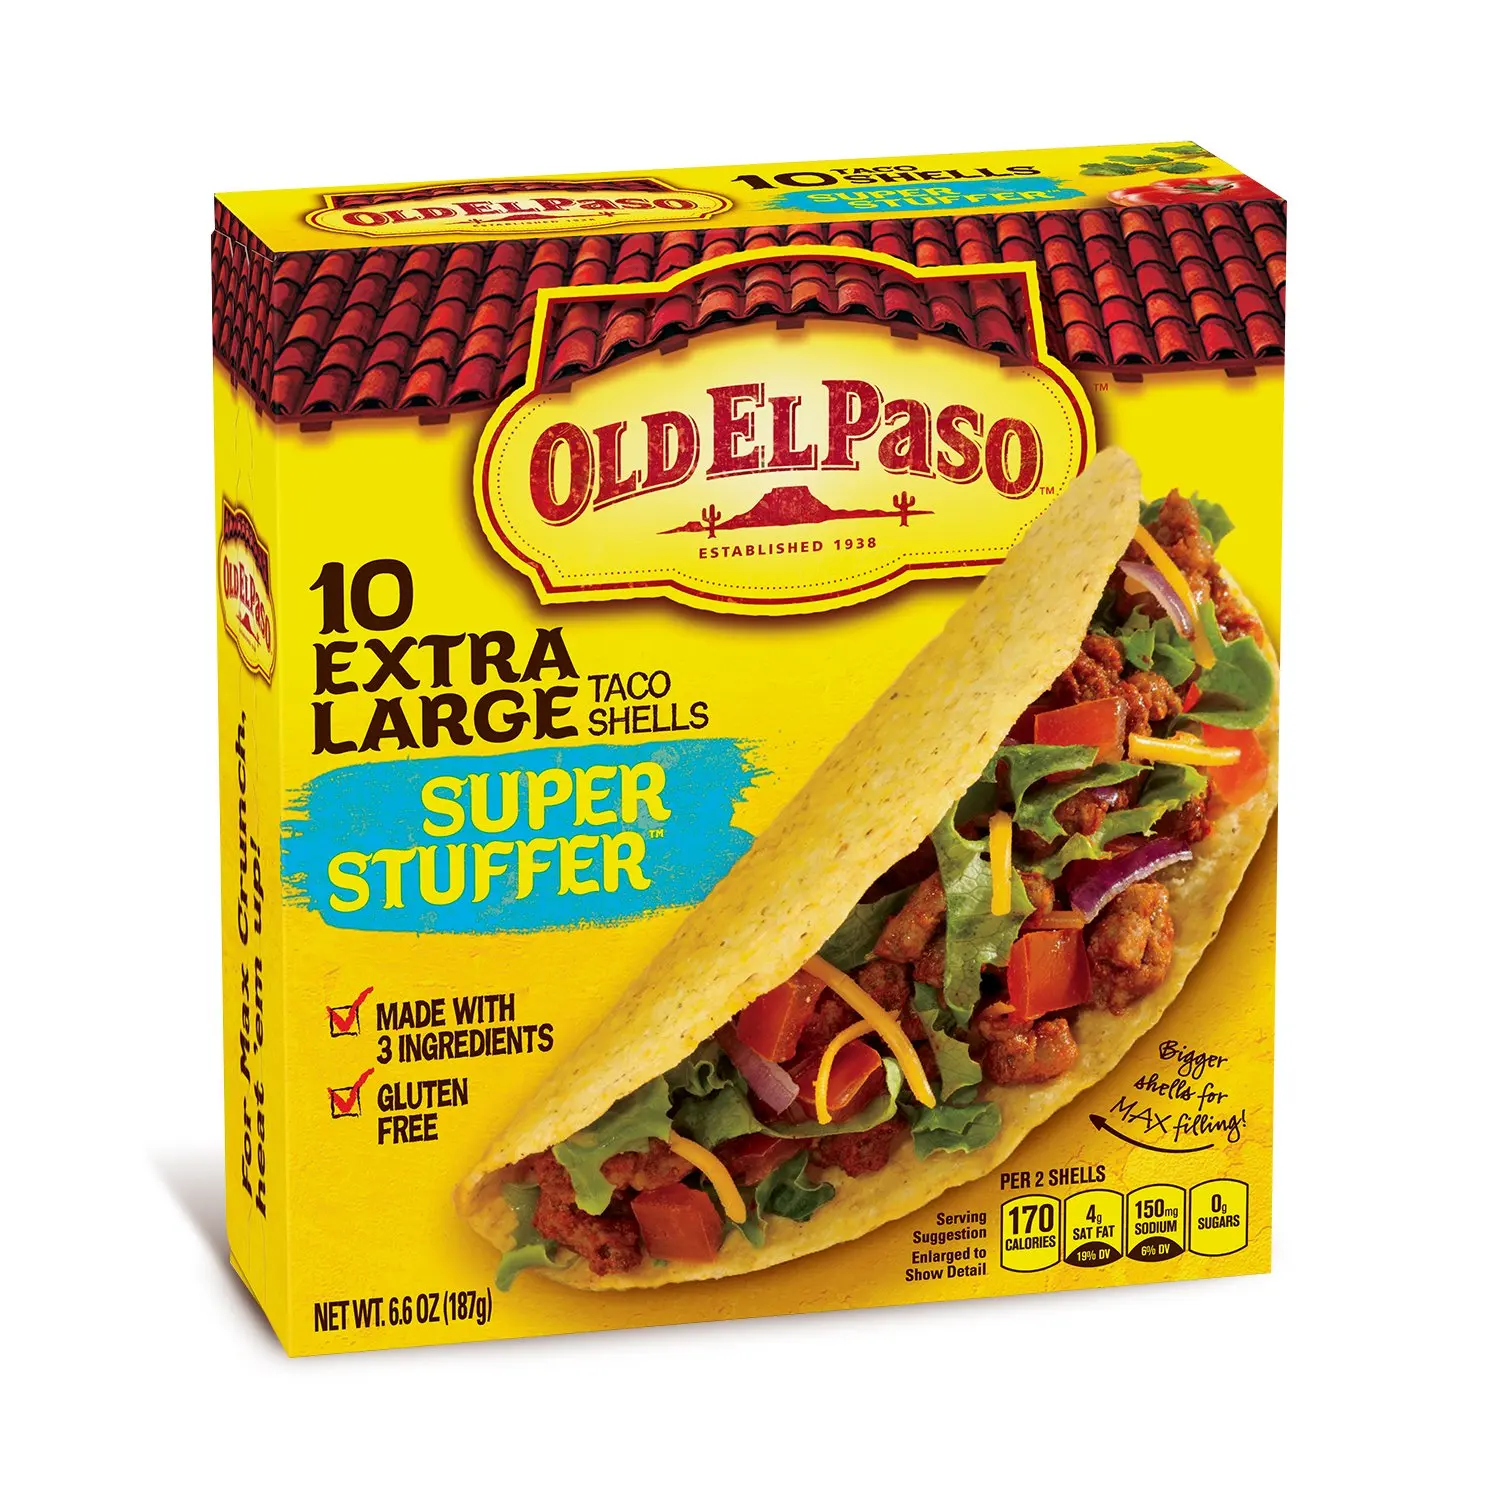 38.38. Old El Paso Super Taco Shells, 6.6-Ounce Boxes (Pack of 12). 